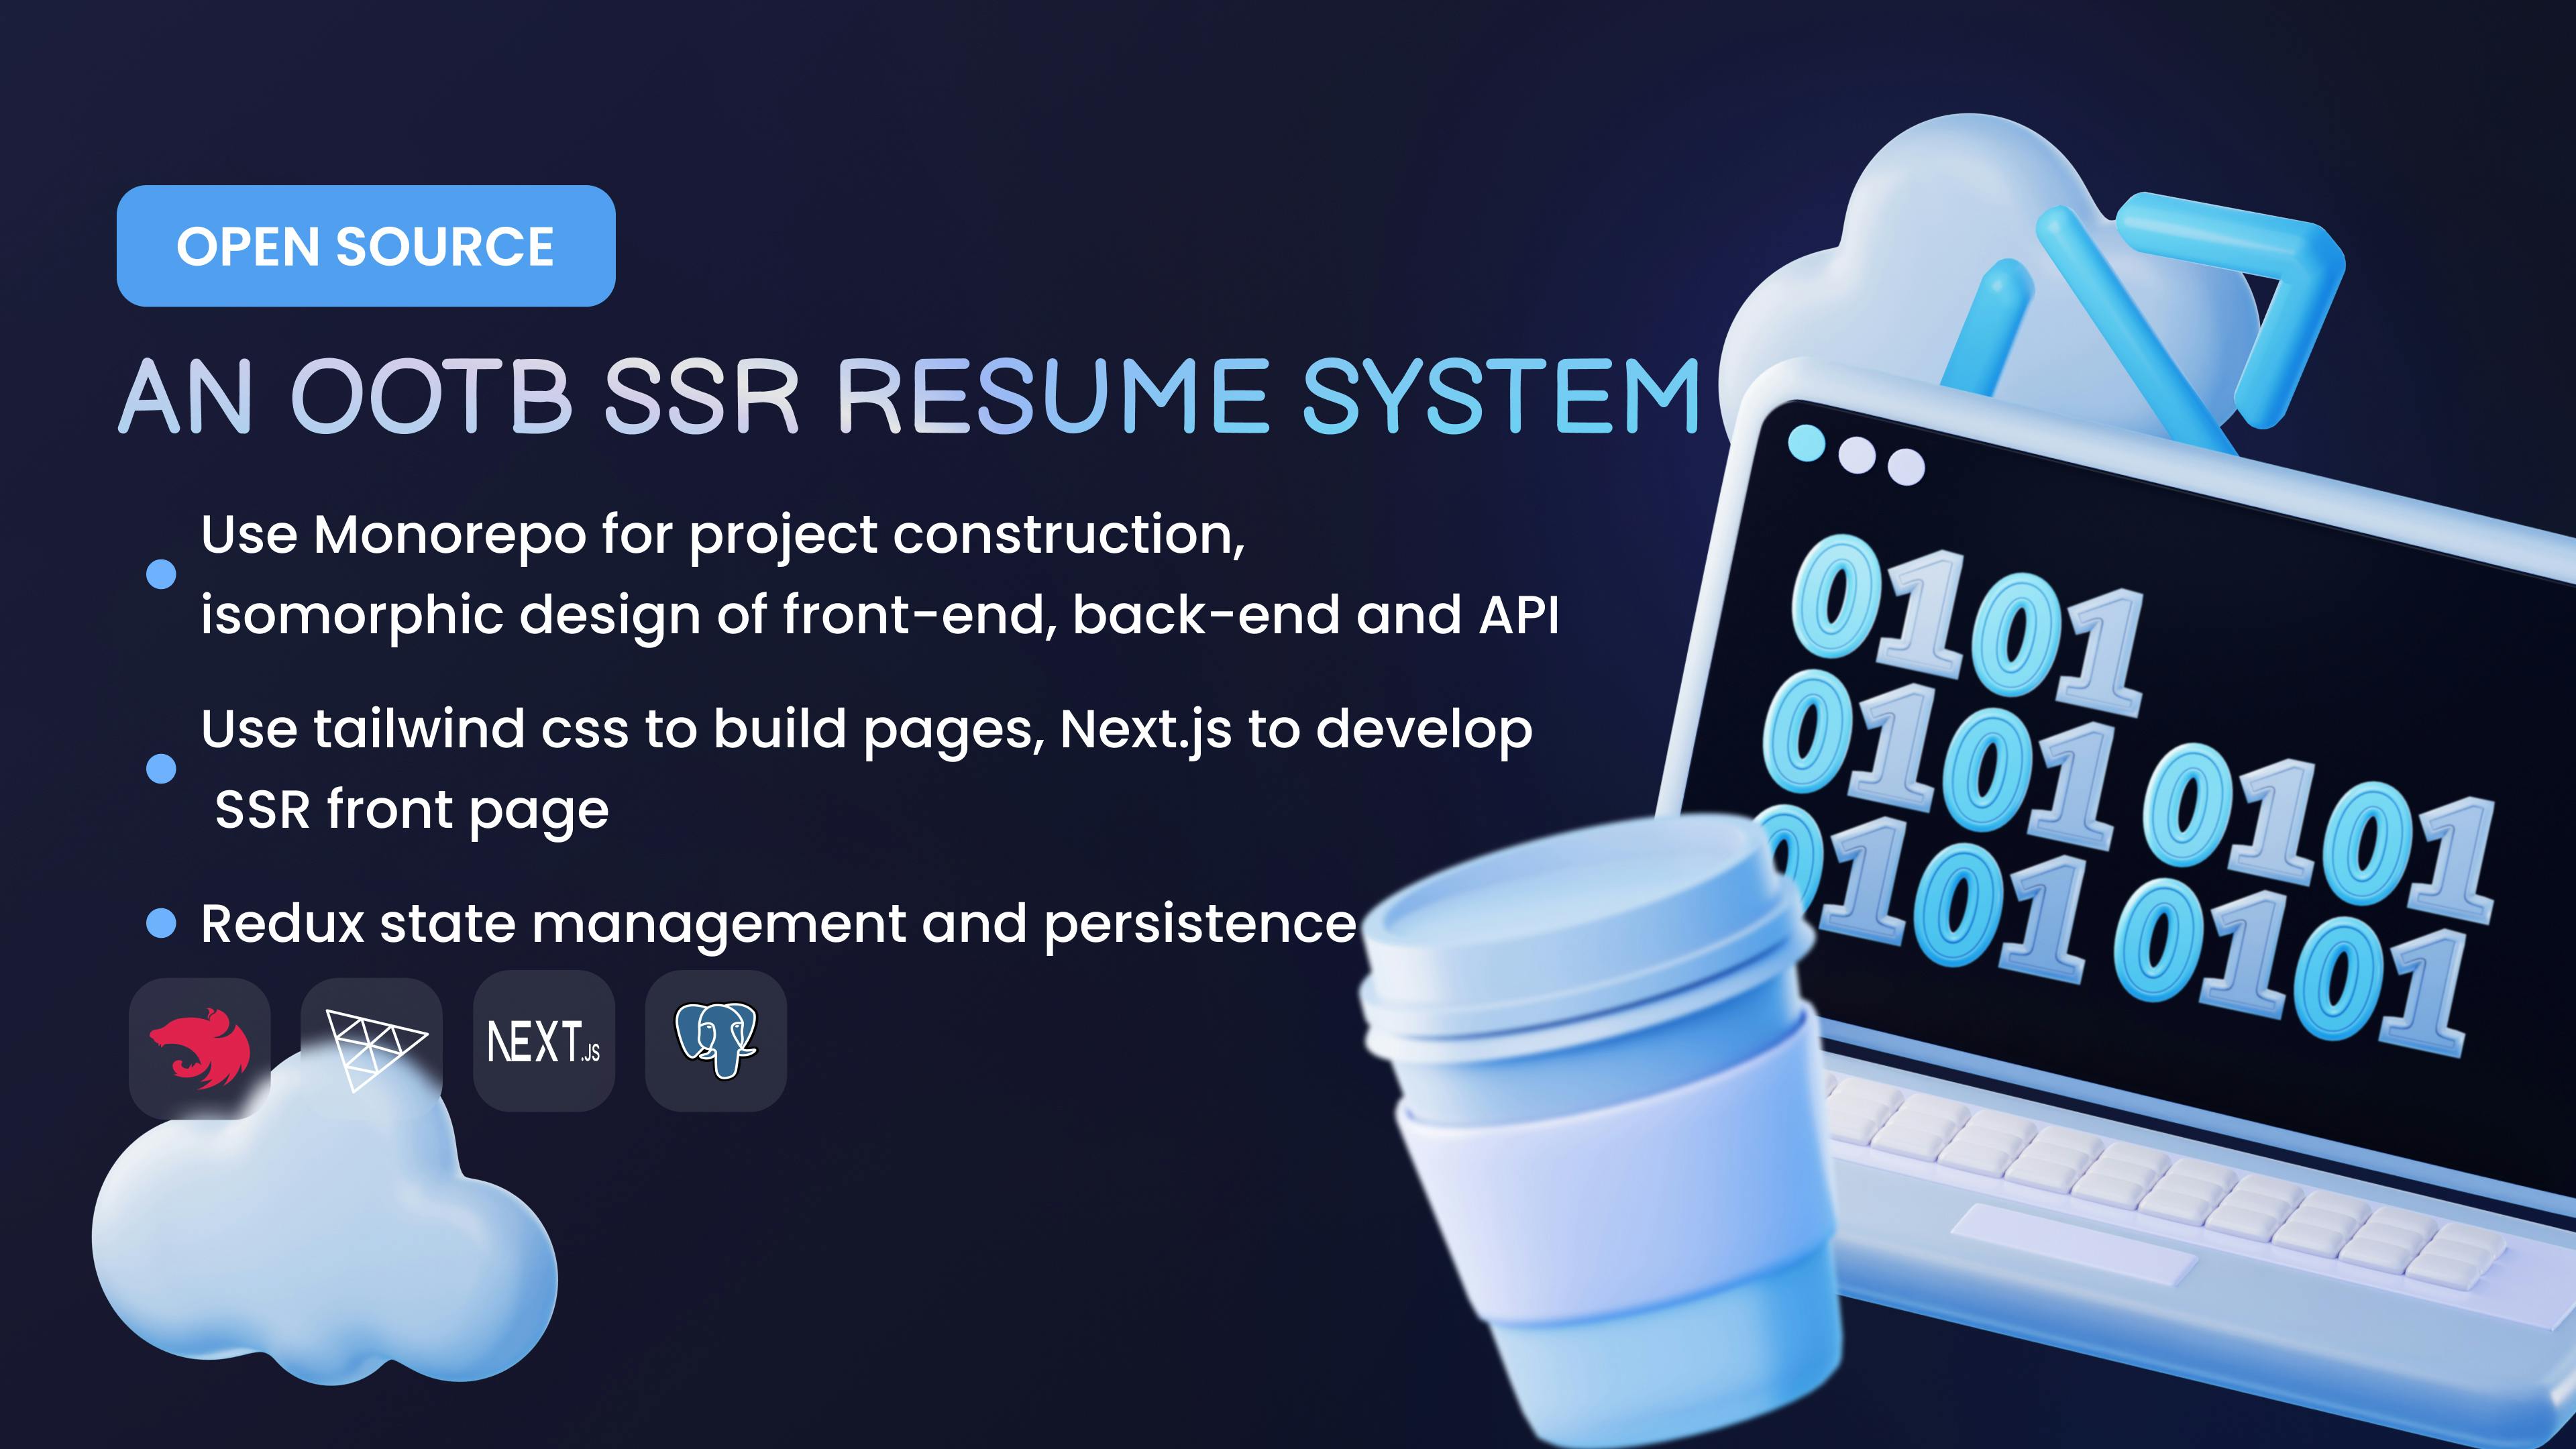 An OOTB SSR resume system